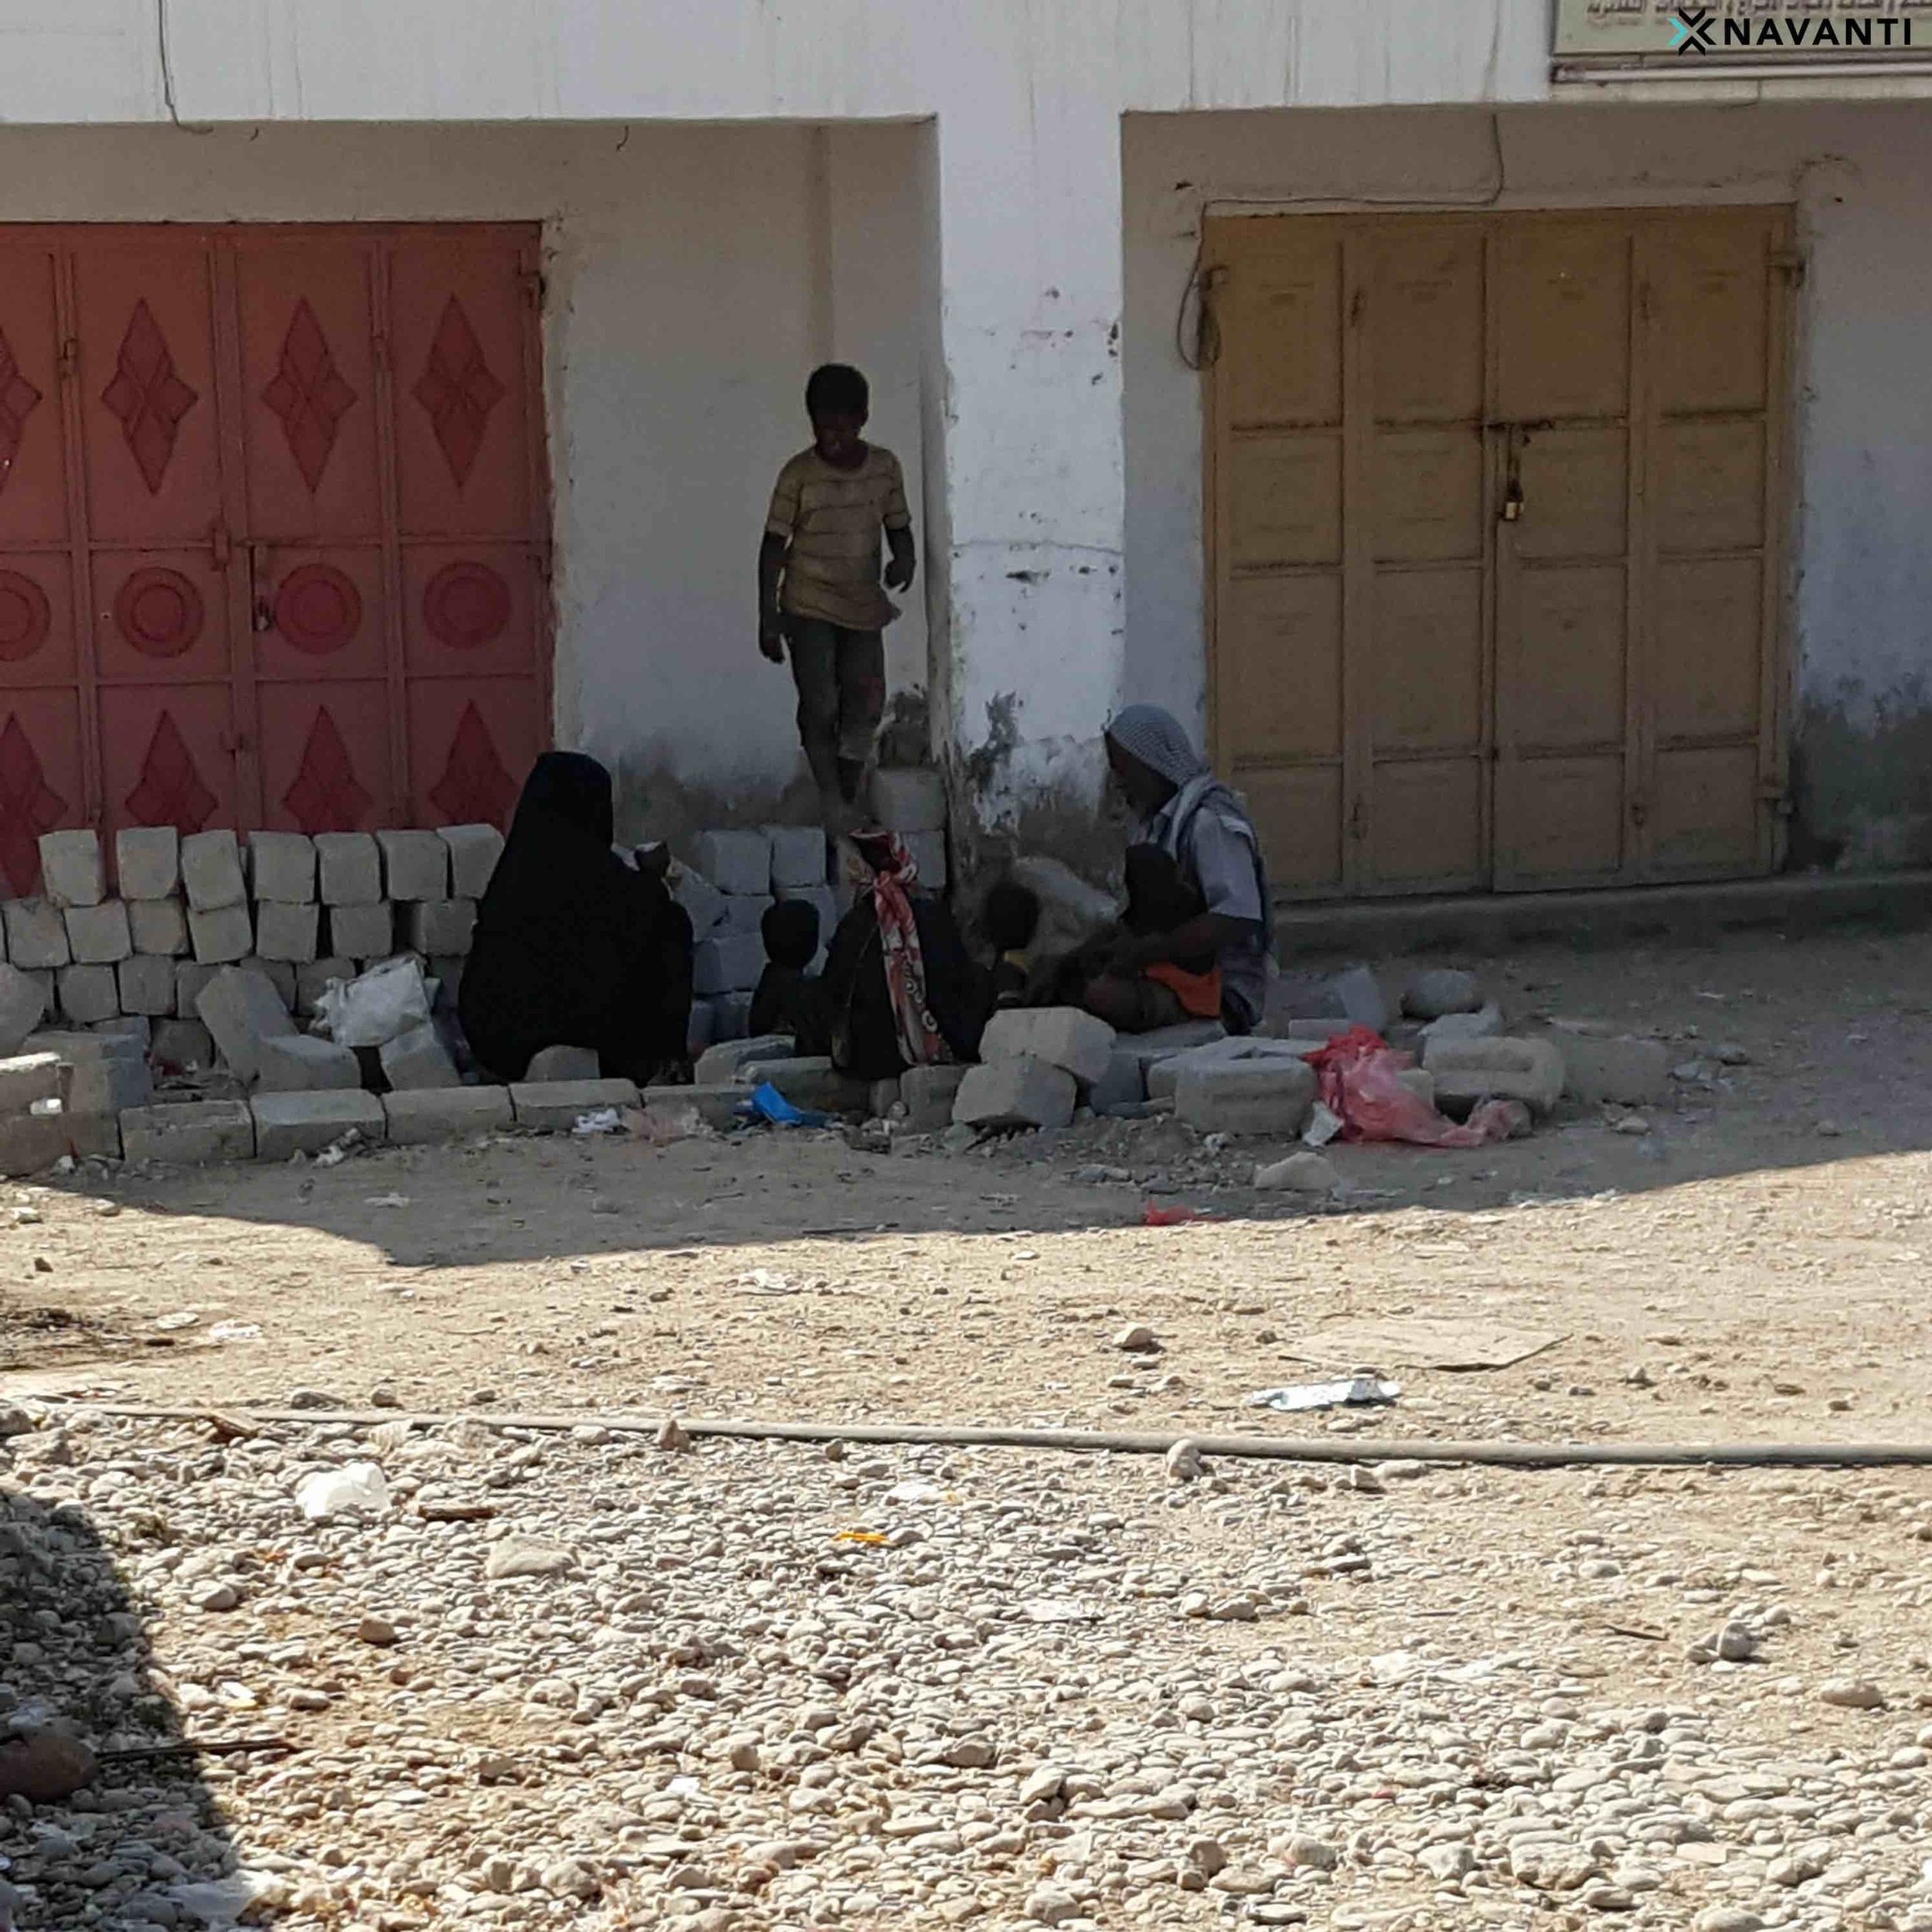 Family eating patrons’ leftovers from nearby restaurant in Sayhut, al-Mahra. Source: Navanti